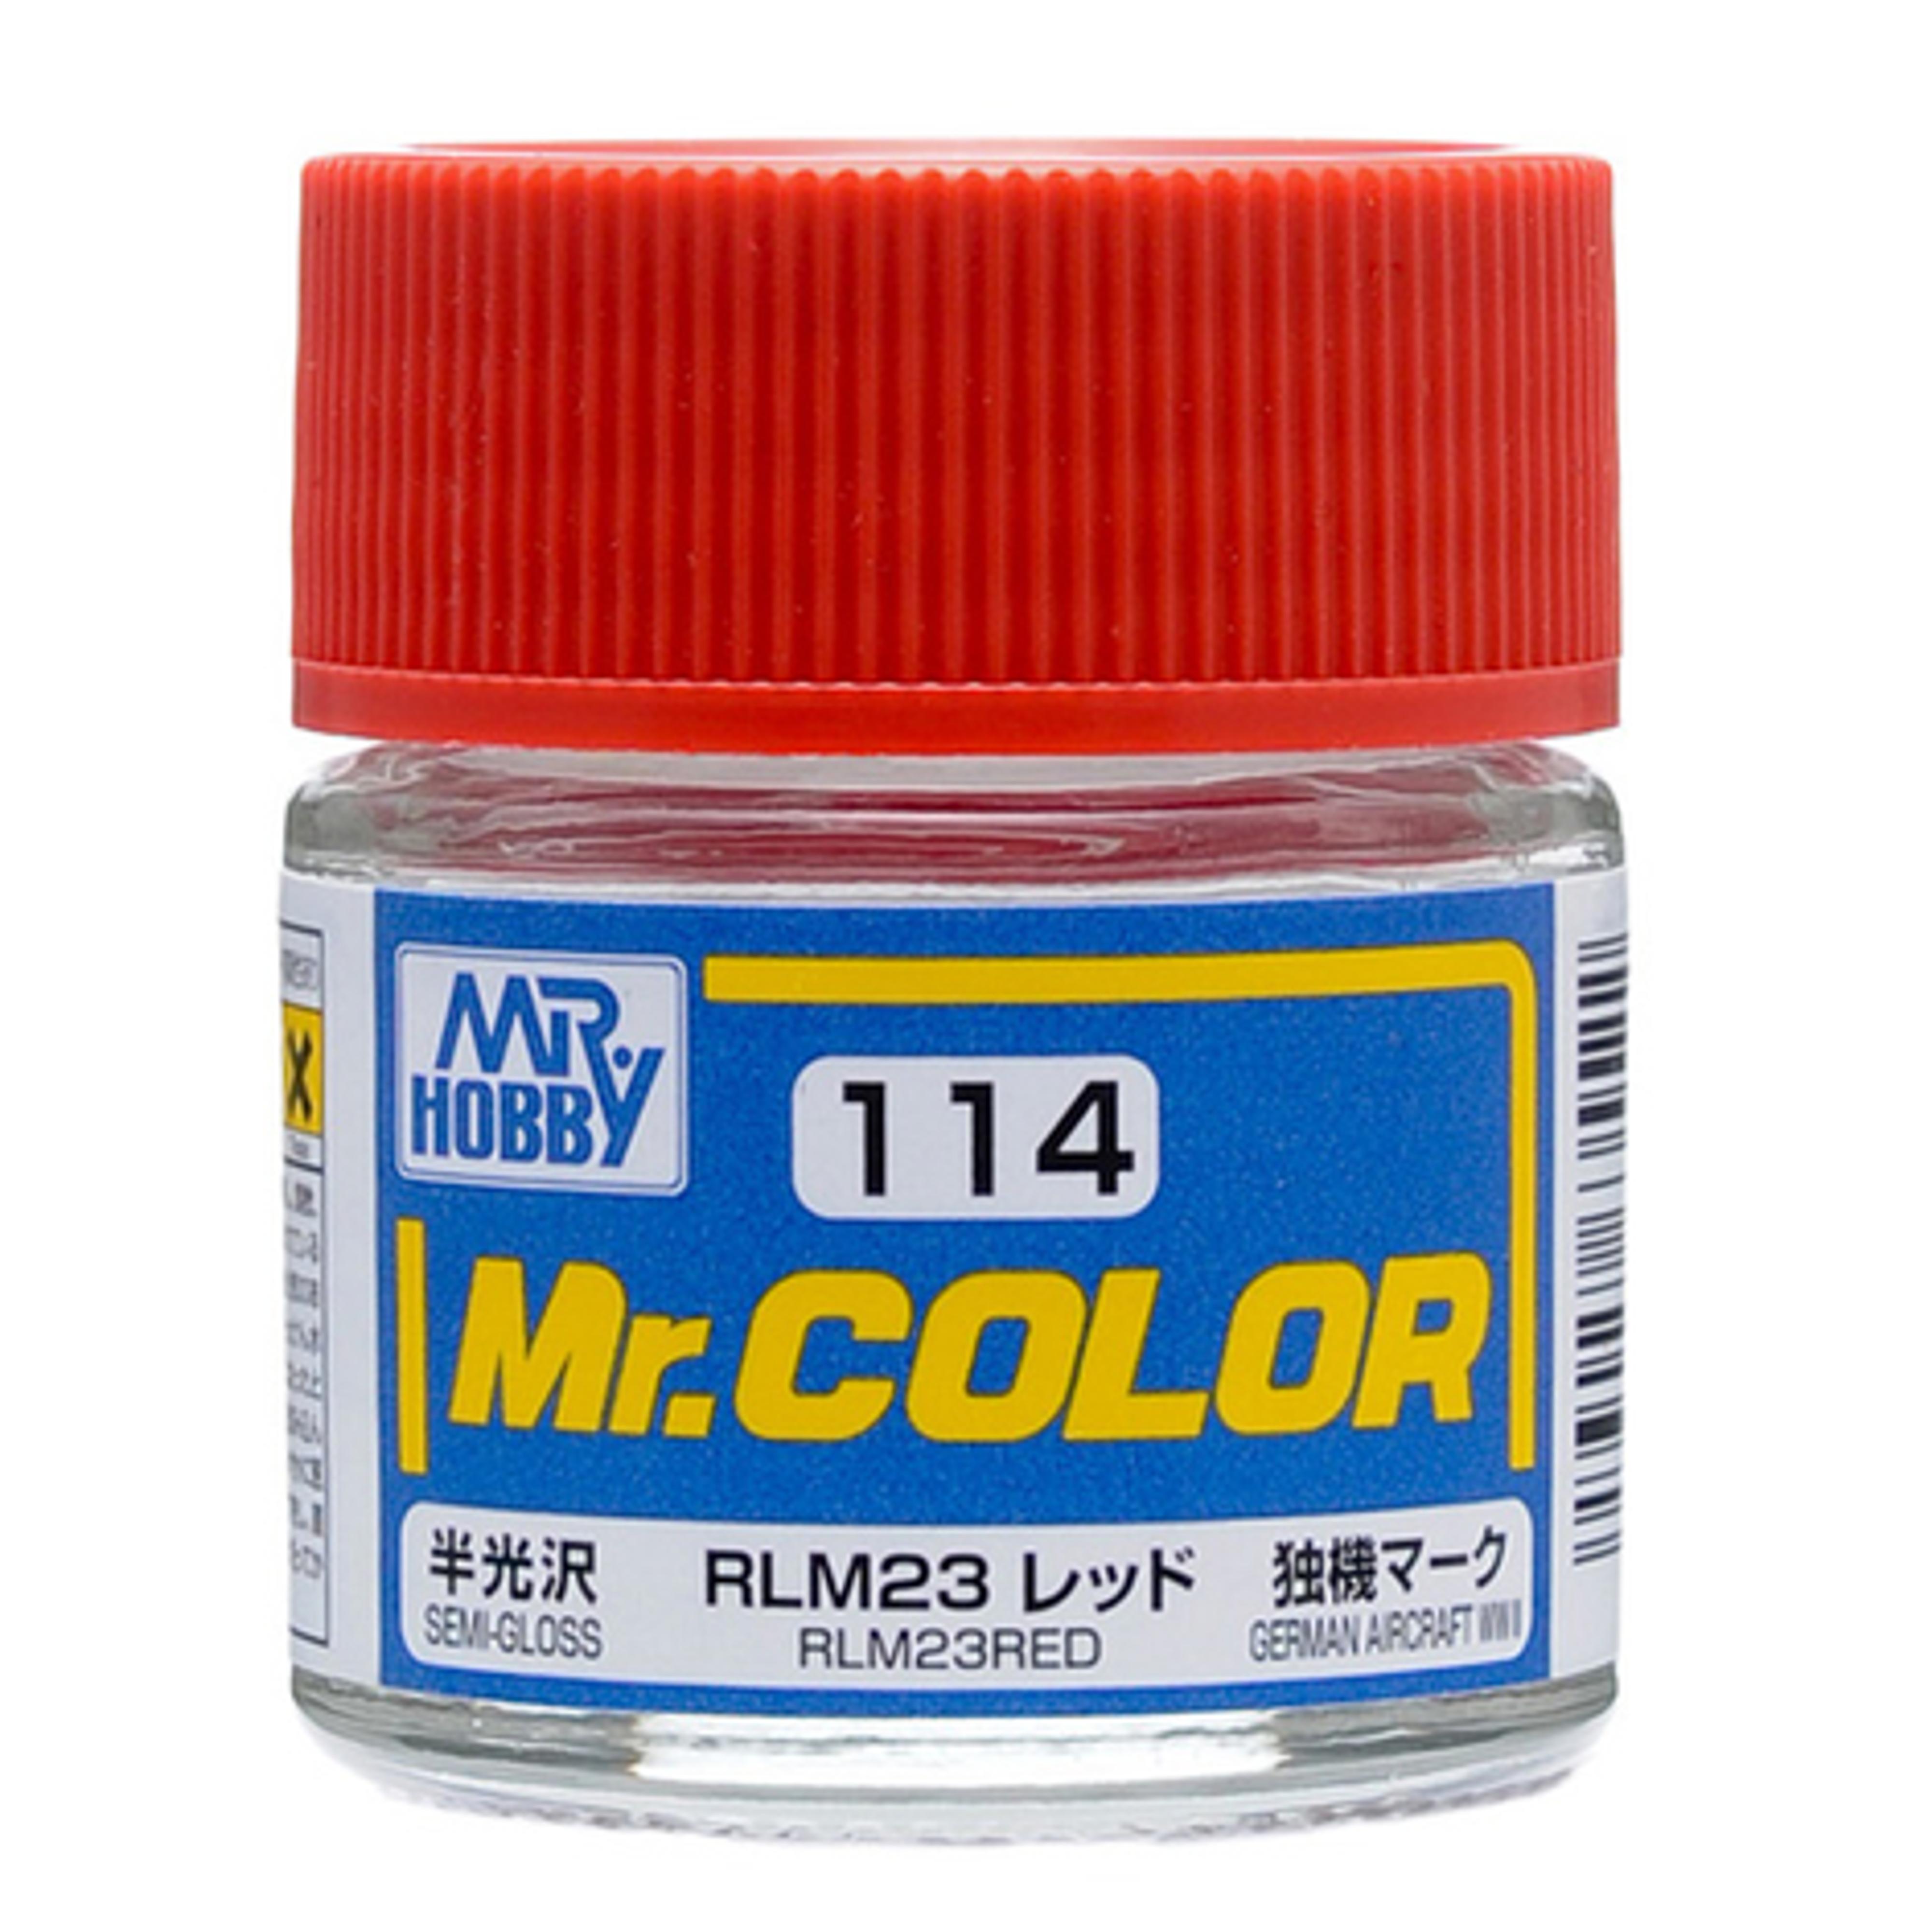 Mr. Hobby Mr. Color Semi-Gloss Red RLM23 Paint